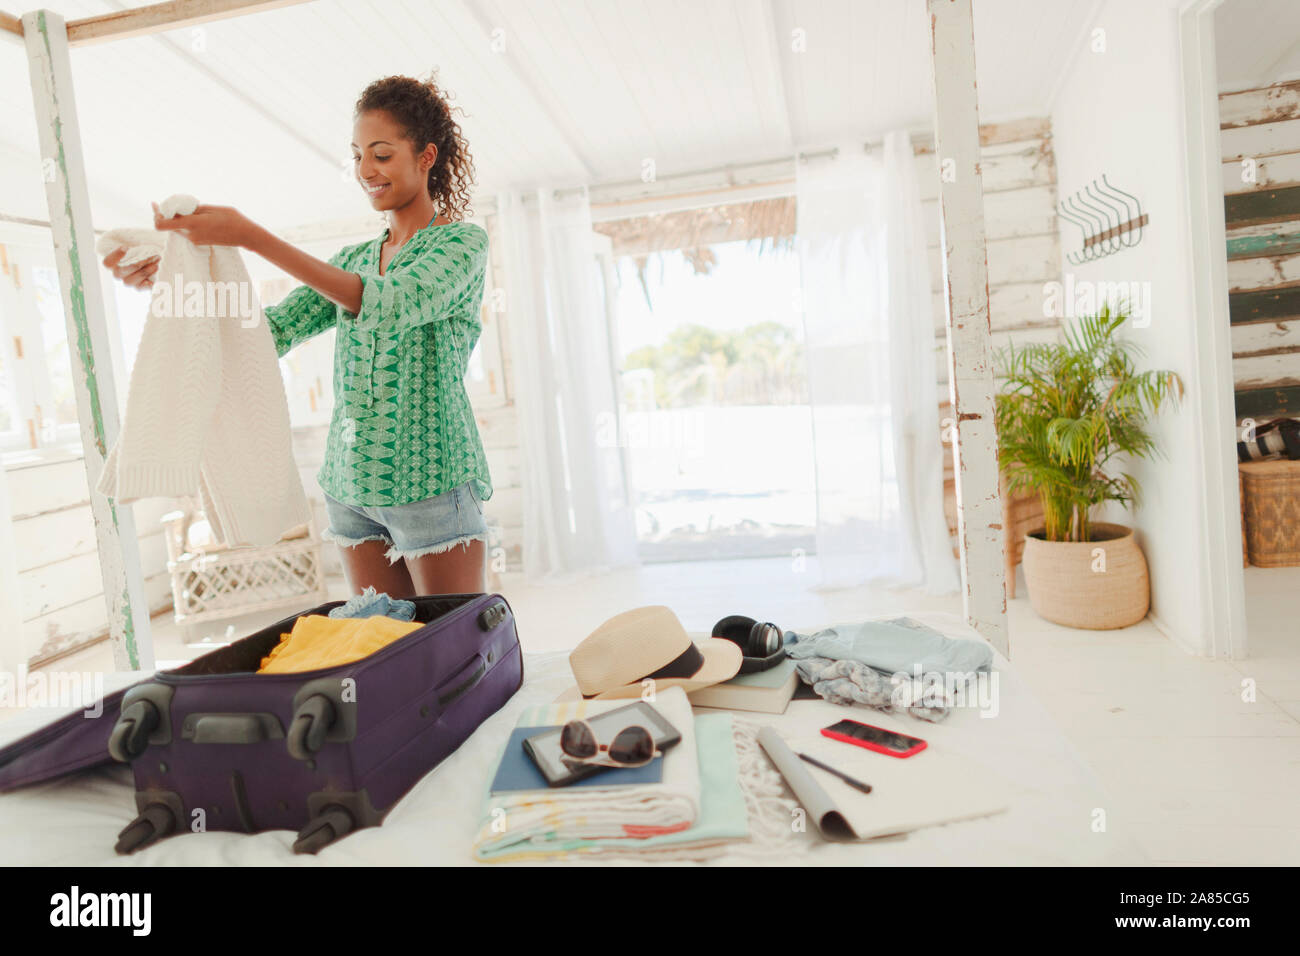 Woman closing full suitcase. Young woman packing her luggage at